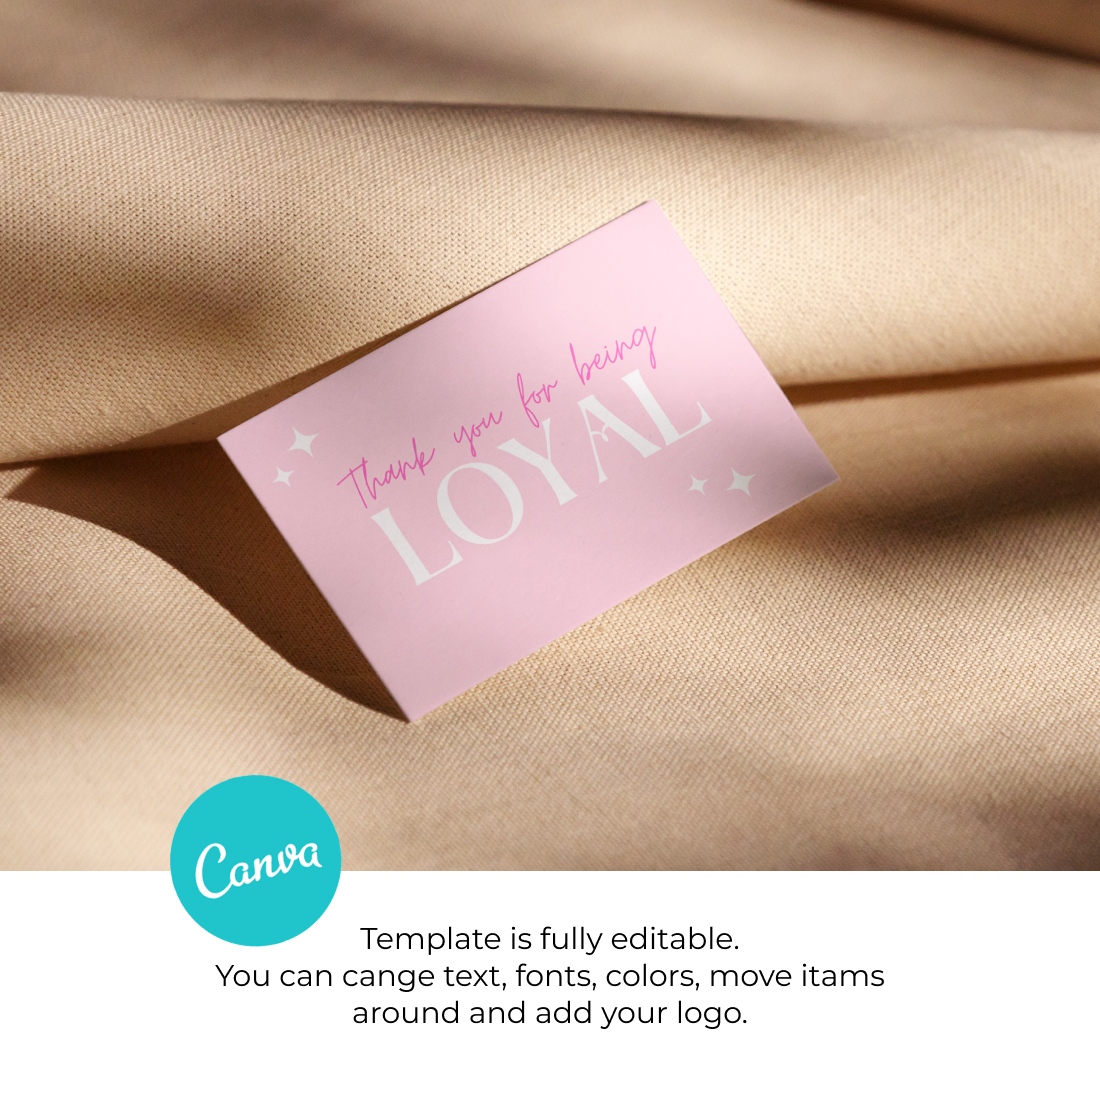 Printable Loyalty Card Template Canva previews.